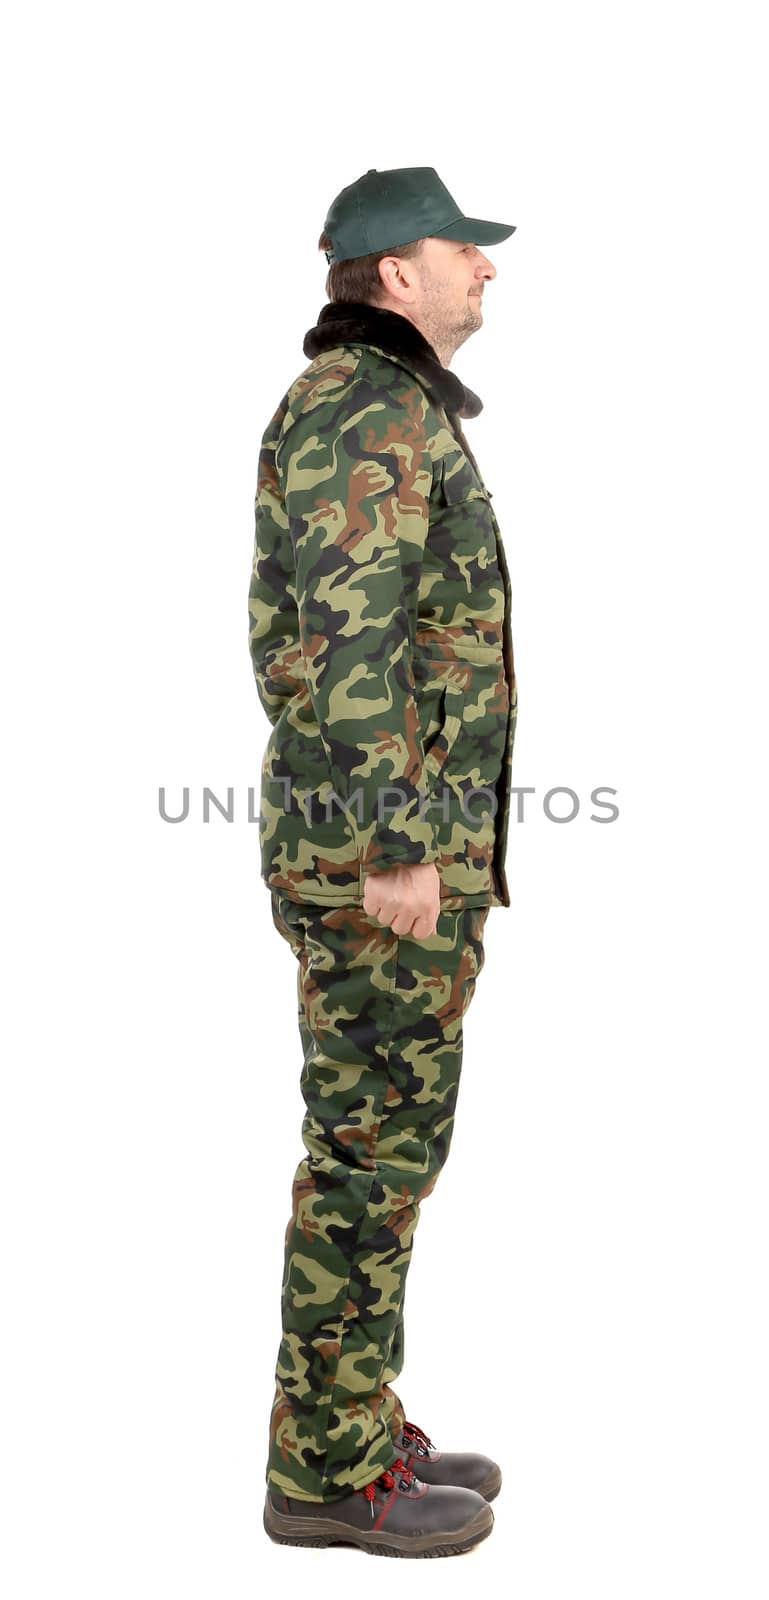 Man in military vest. Side view. Isolated on a white background.